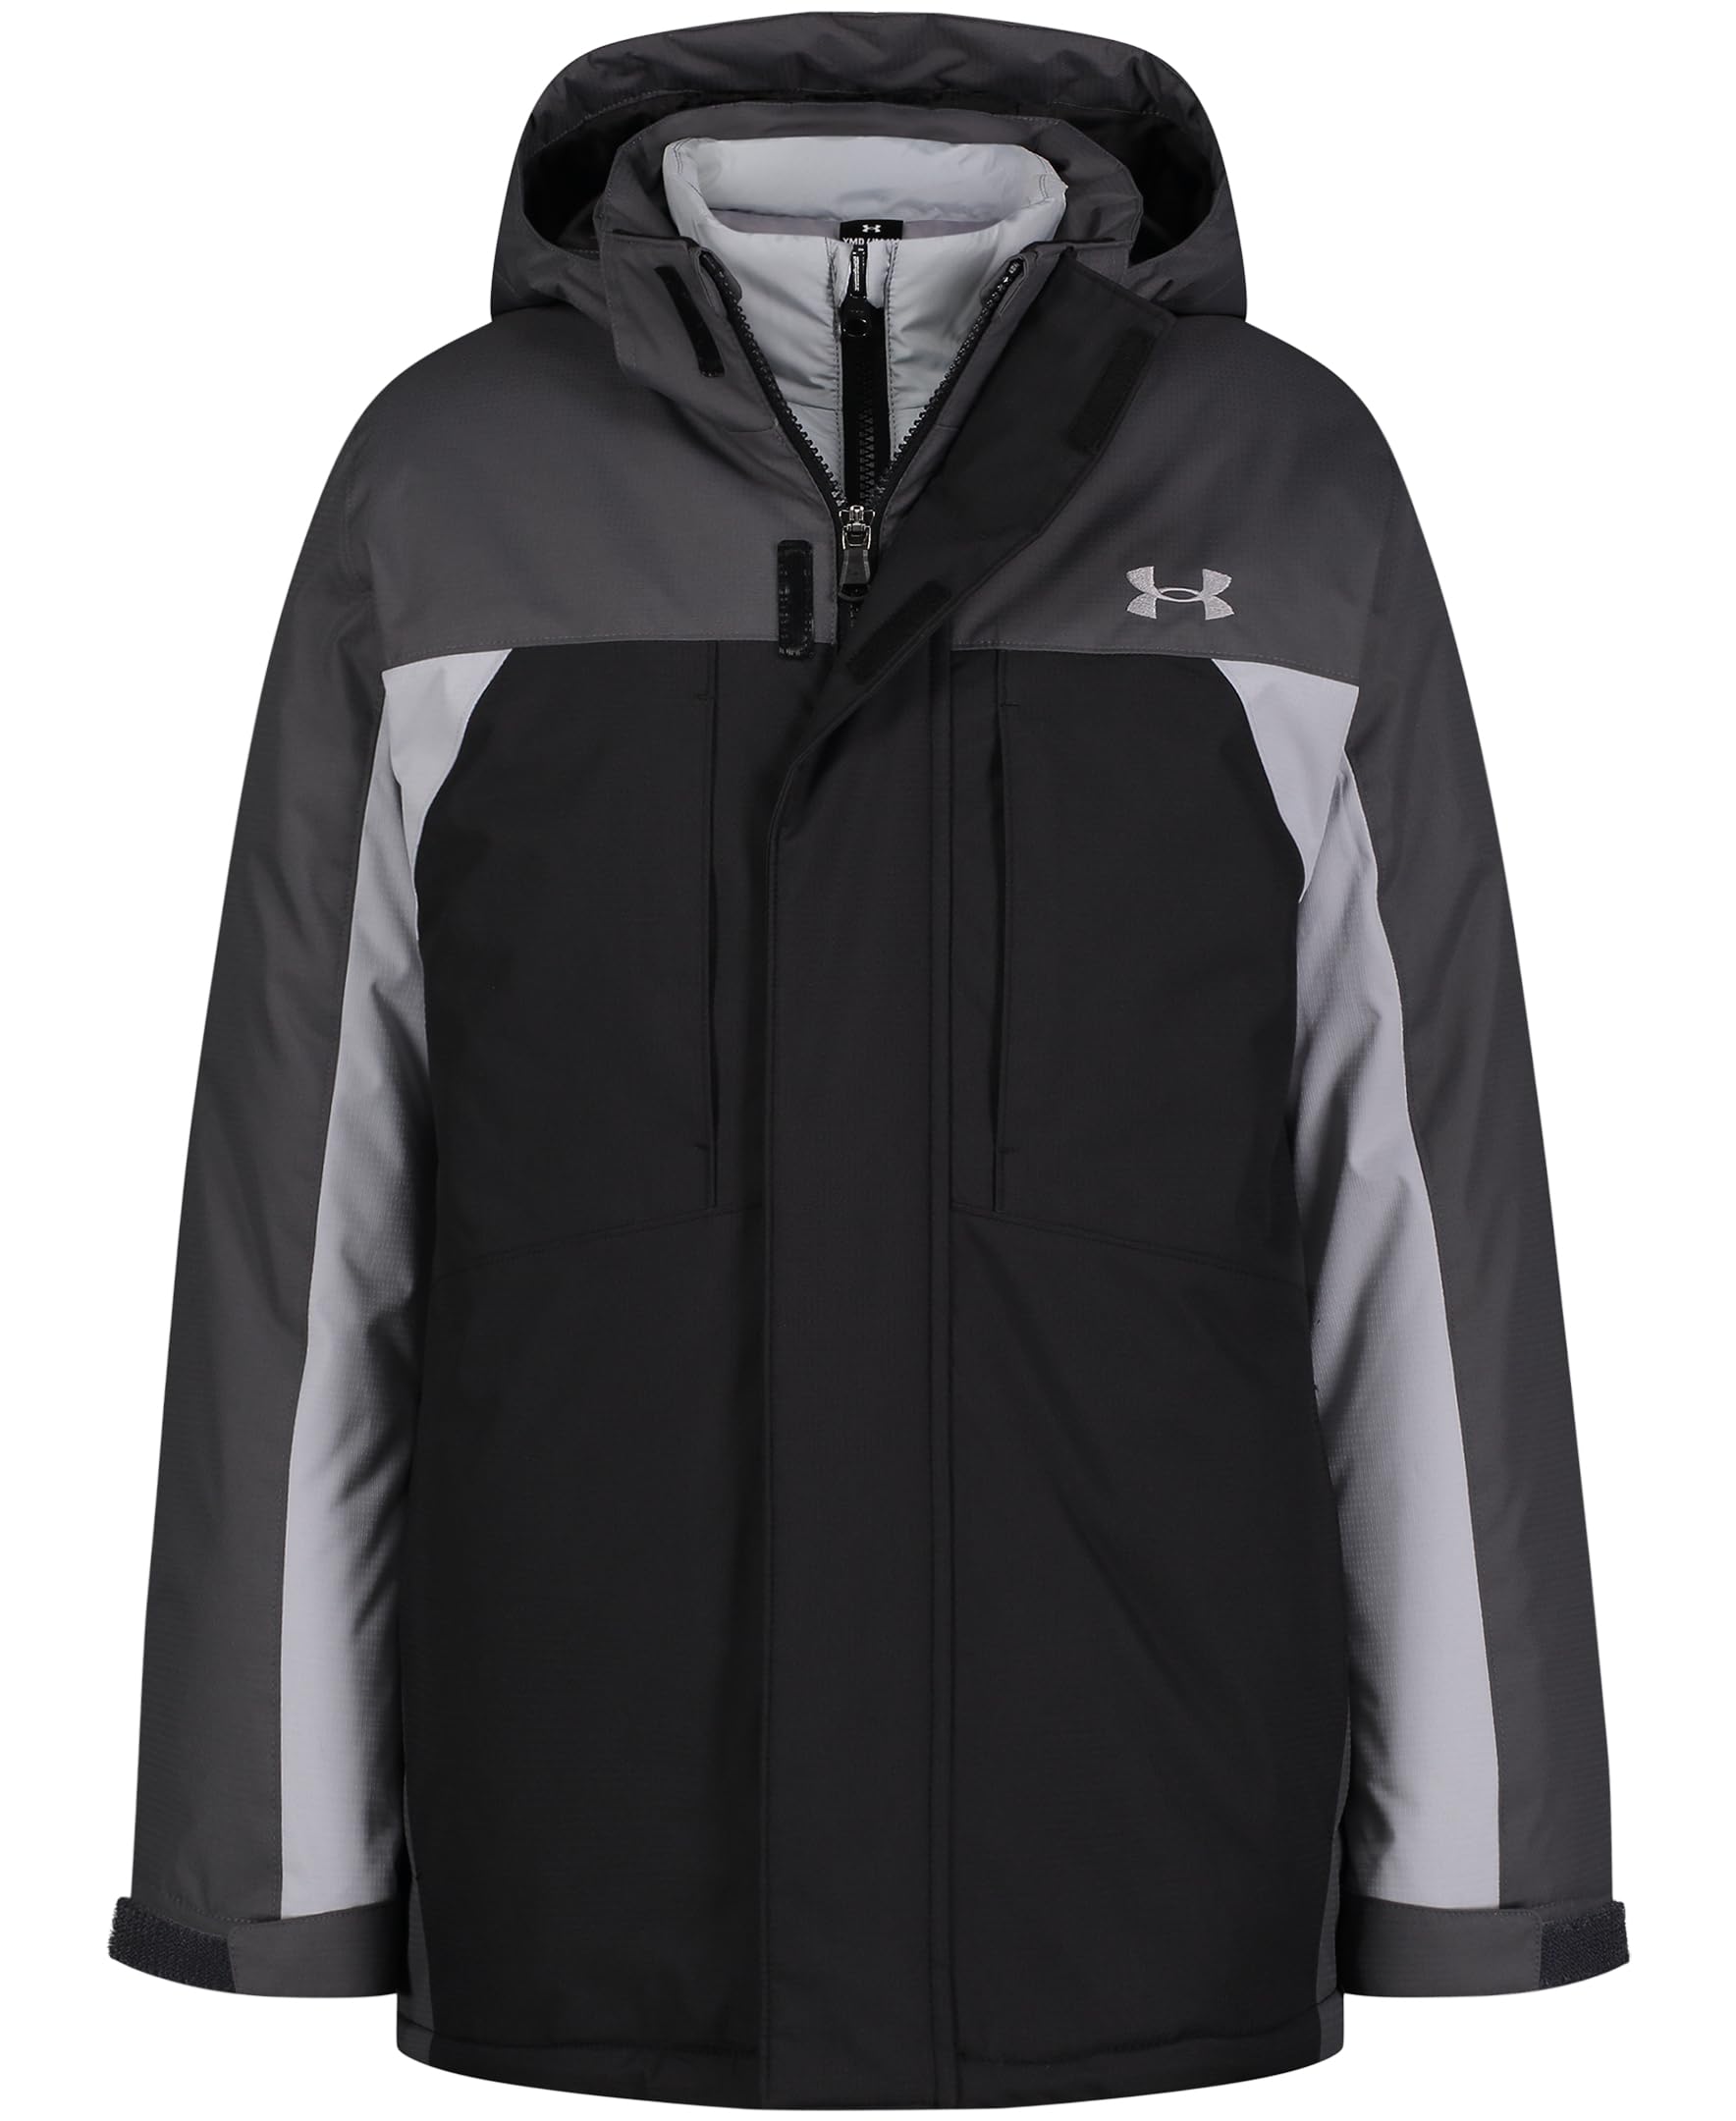 Under Armour Boys' Westward 3-in-1 Jacket, Removable Hood & Liner, Windproof & Water Repellant